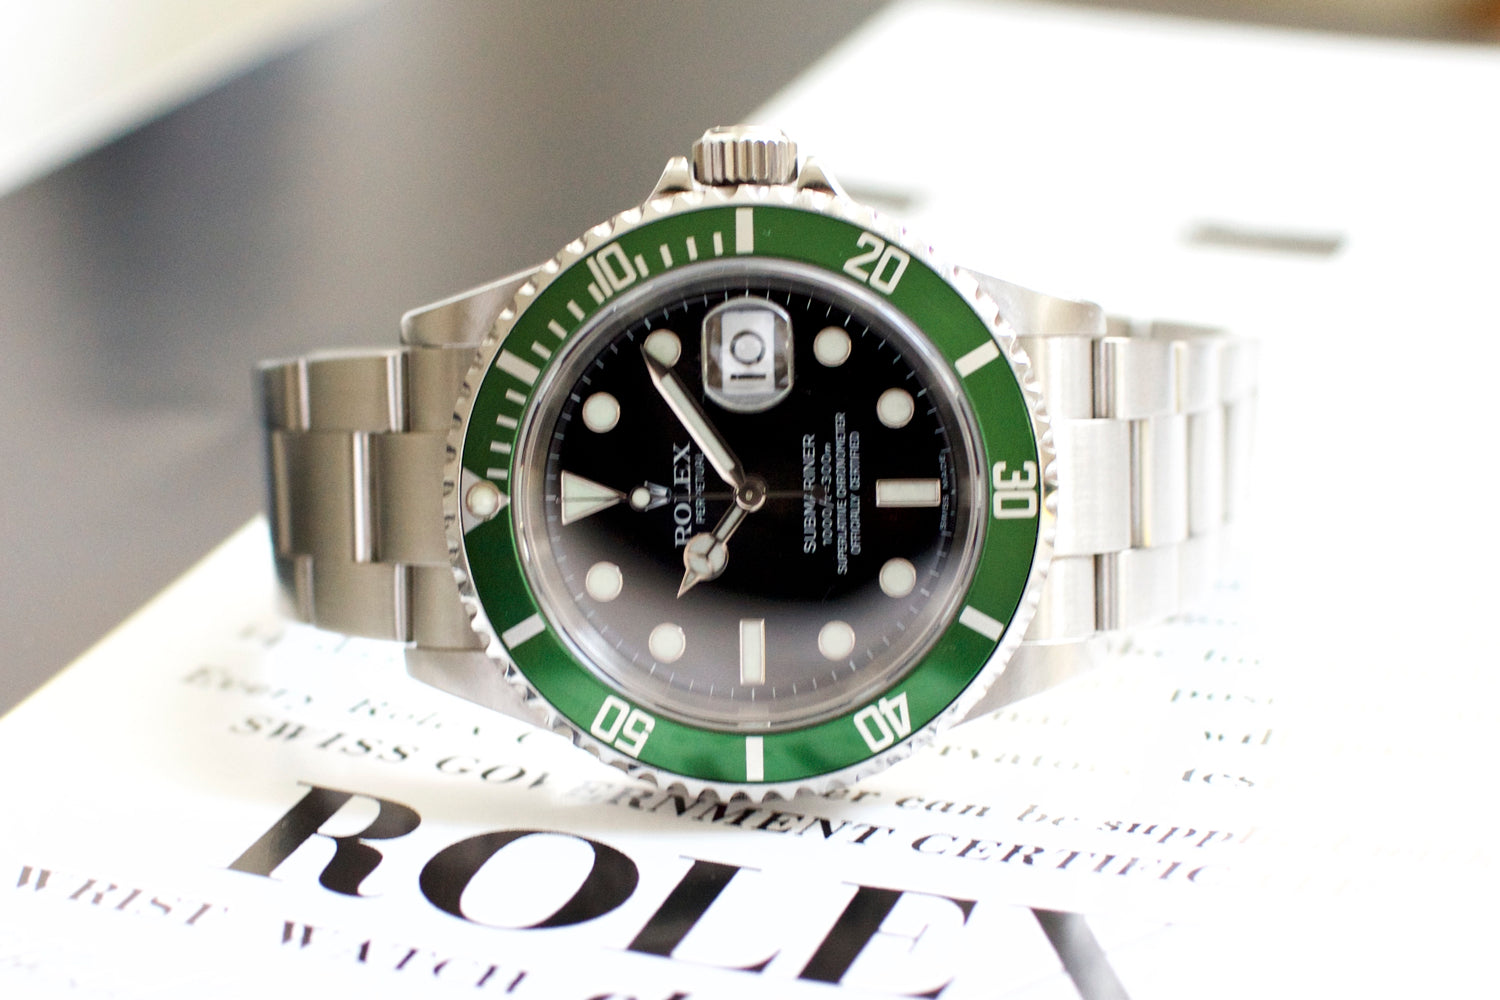 Pre-Owned Luxury Watch Gift Rolex Submariner